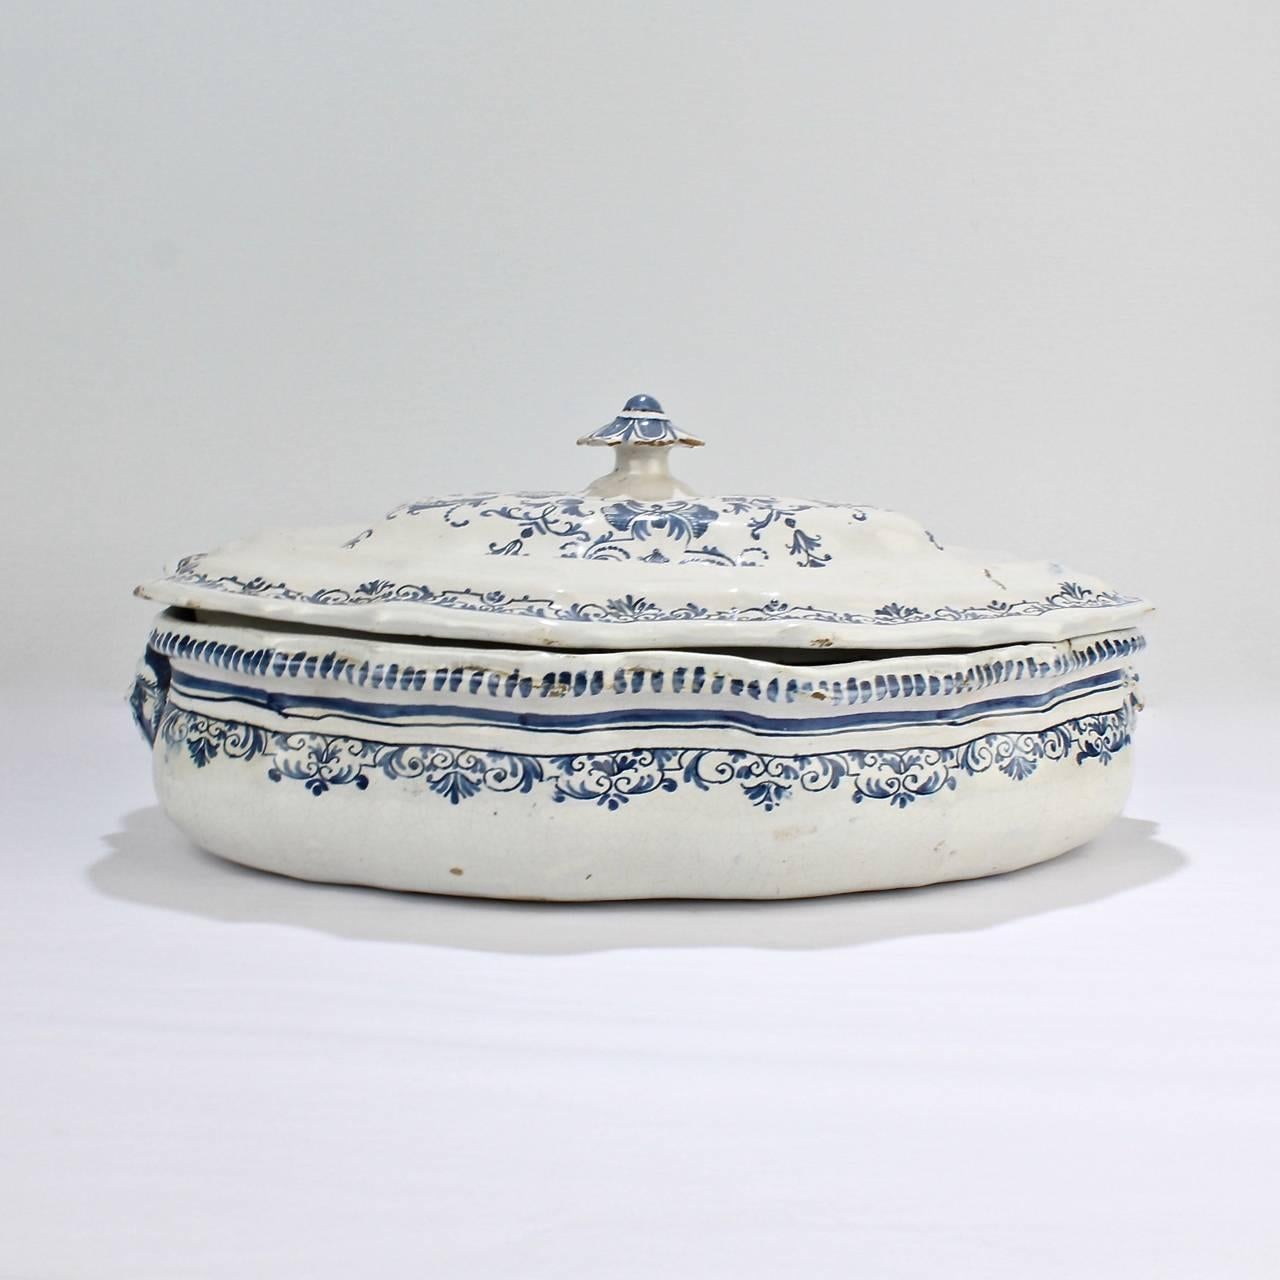 A wonderful antique Soupière et son Couvercle en Faience (French faience Tureen and Cover).

Dating to the early 18th century, this very rare form is decorated in the Moustiers style and possibly from the workshop of Clermont-Ferrand.

With